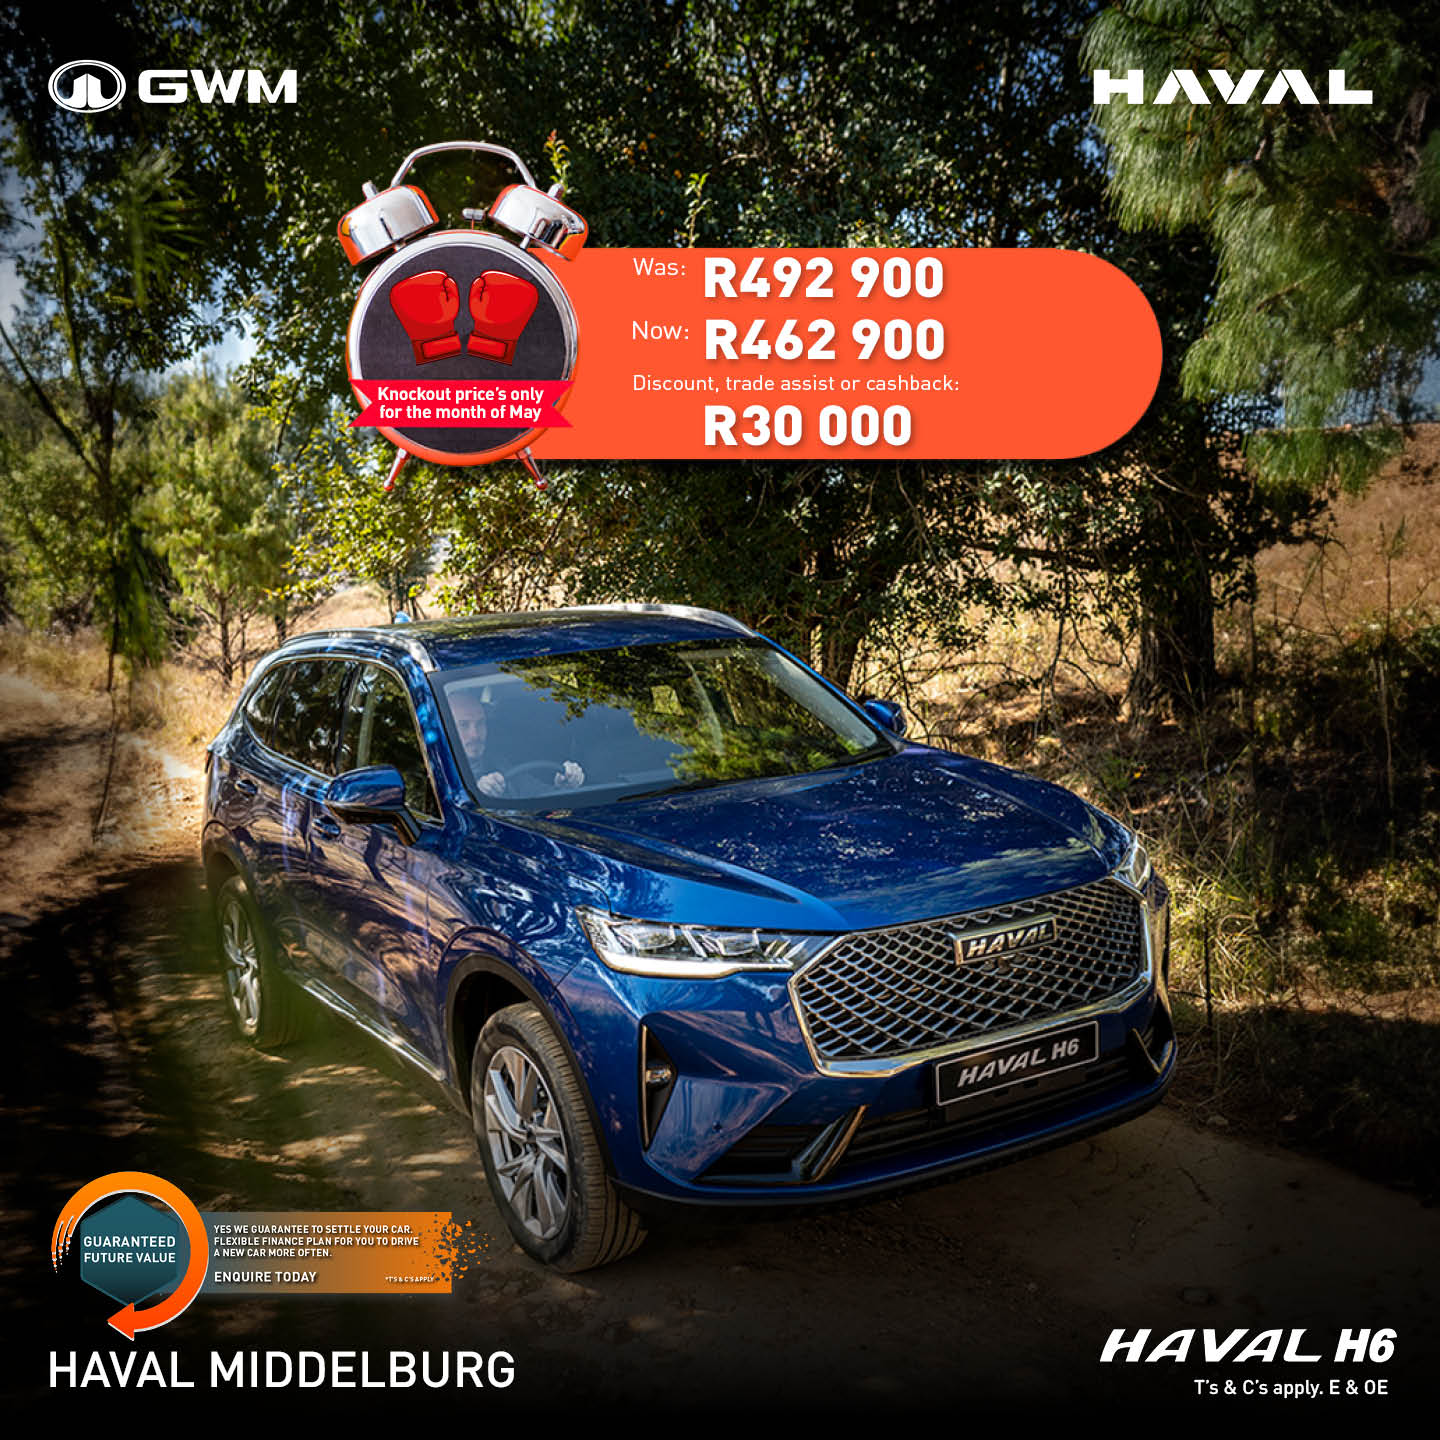 Haval H6 image from 